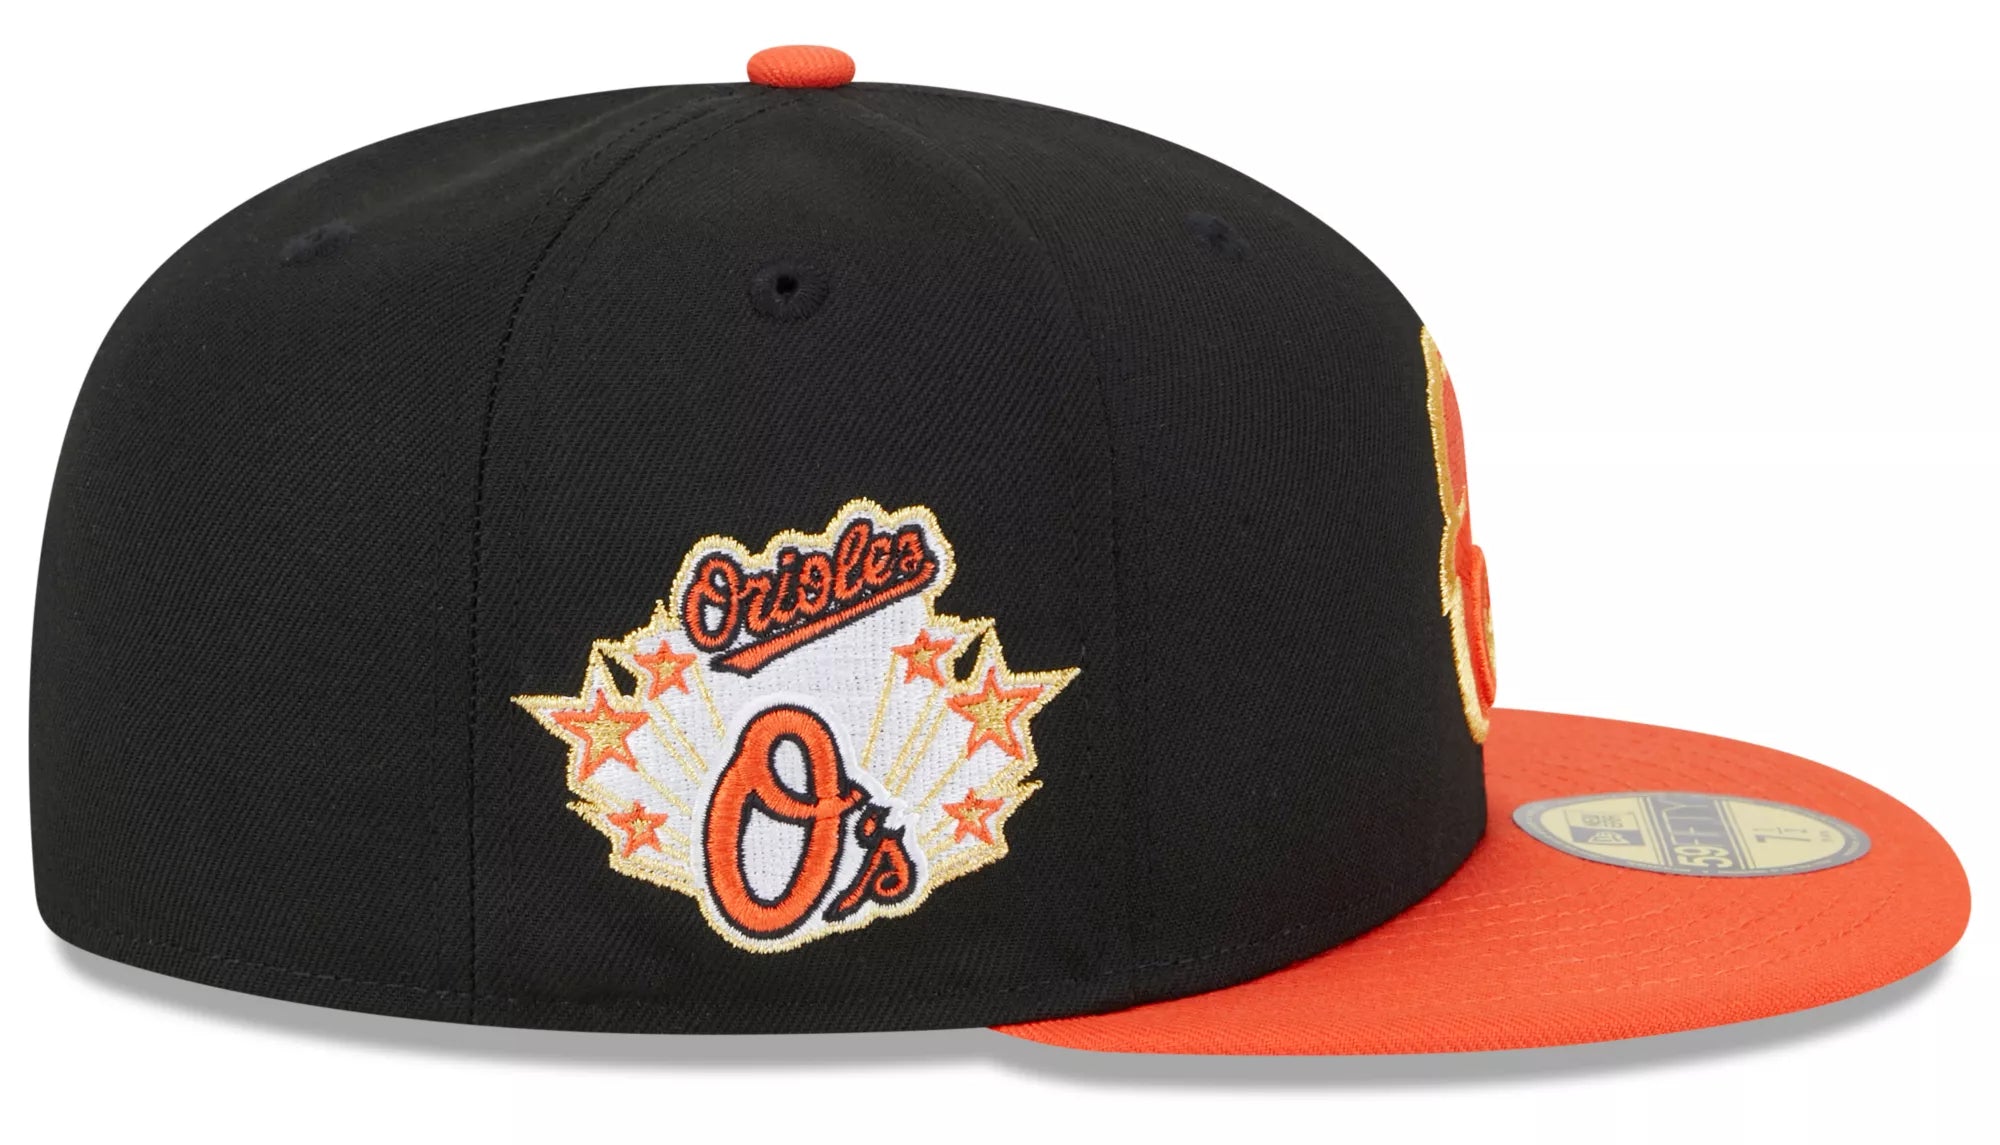 New Era Baltimore Orioles Game Day 59FIFTY Fitted Hat